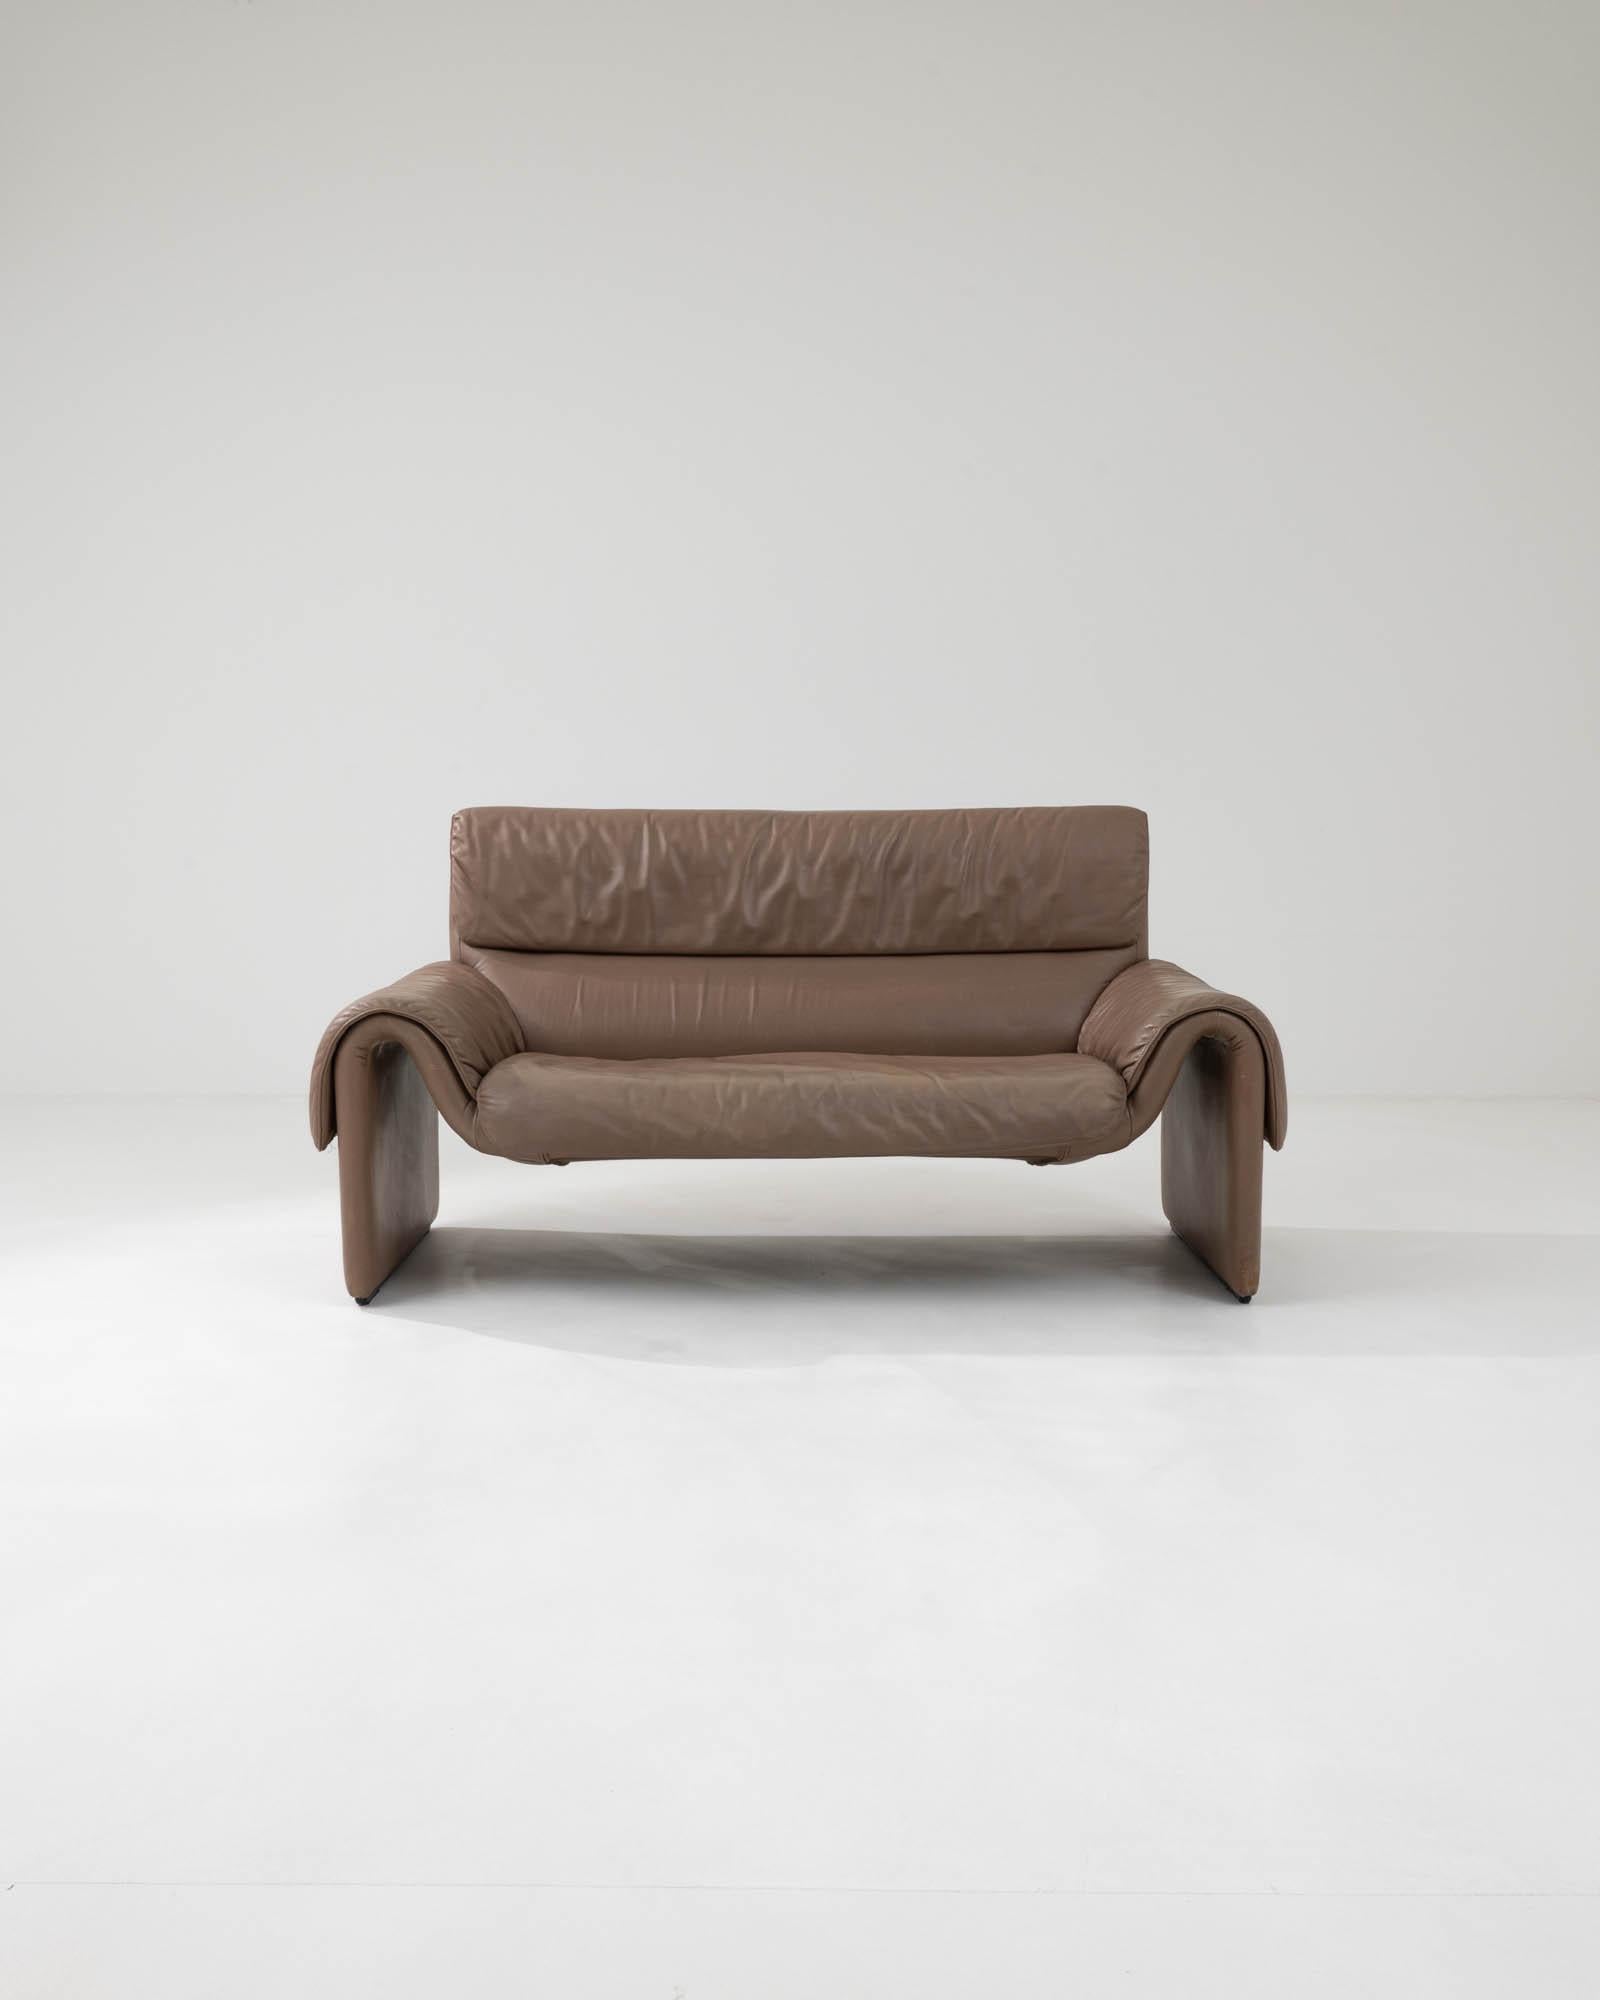 The captivating interplay of unconventional shapes and sleek materials defines the DS2011 sofa, a creation by the iconic Swiss brand De Sede from the 1980s. Draped in high-quality taupe-toned leather, this piece showcases exquisite contours in the